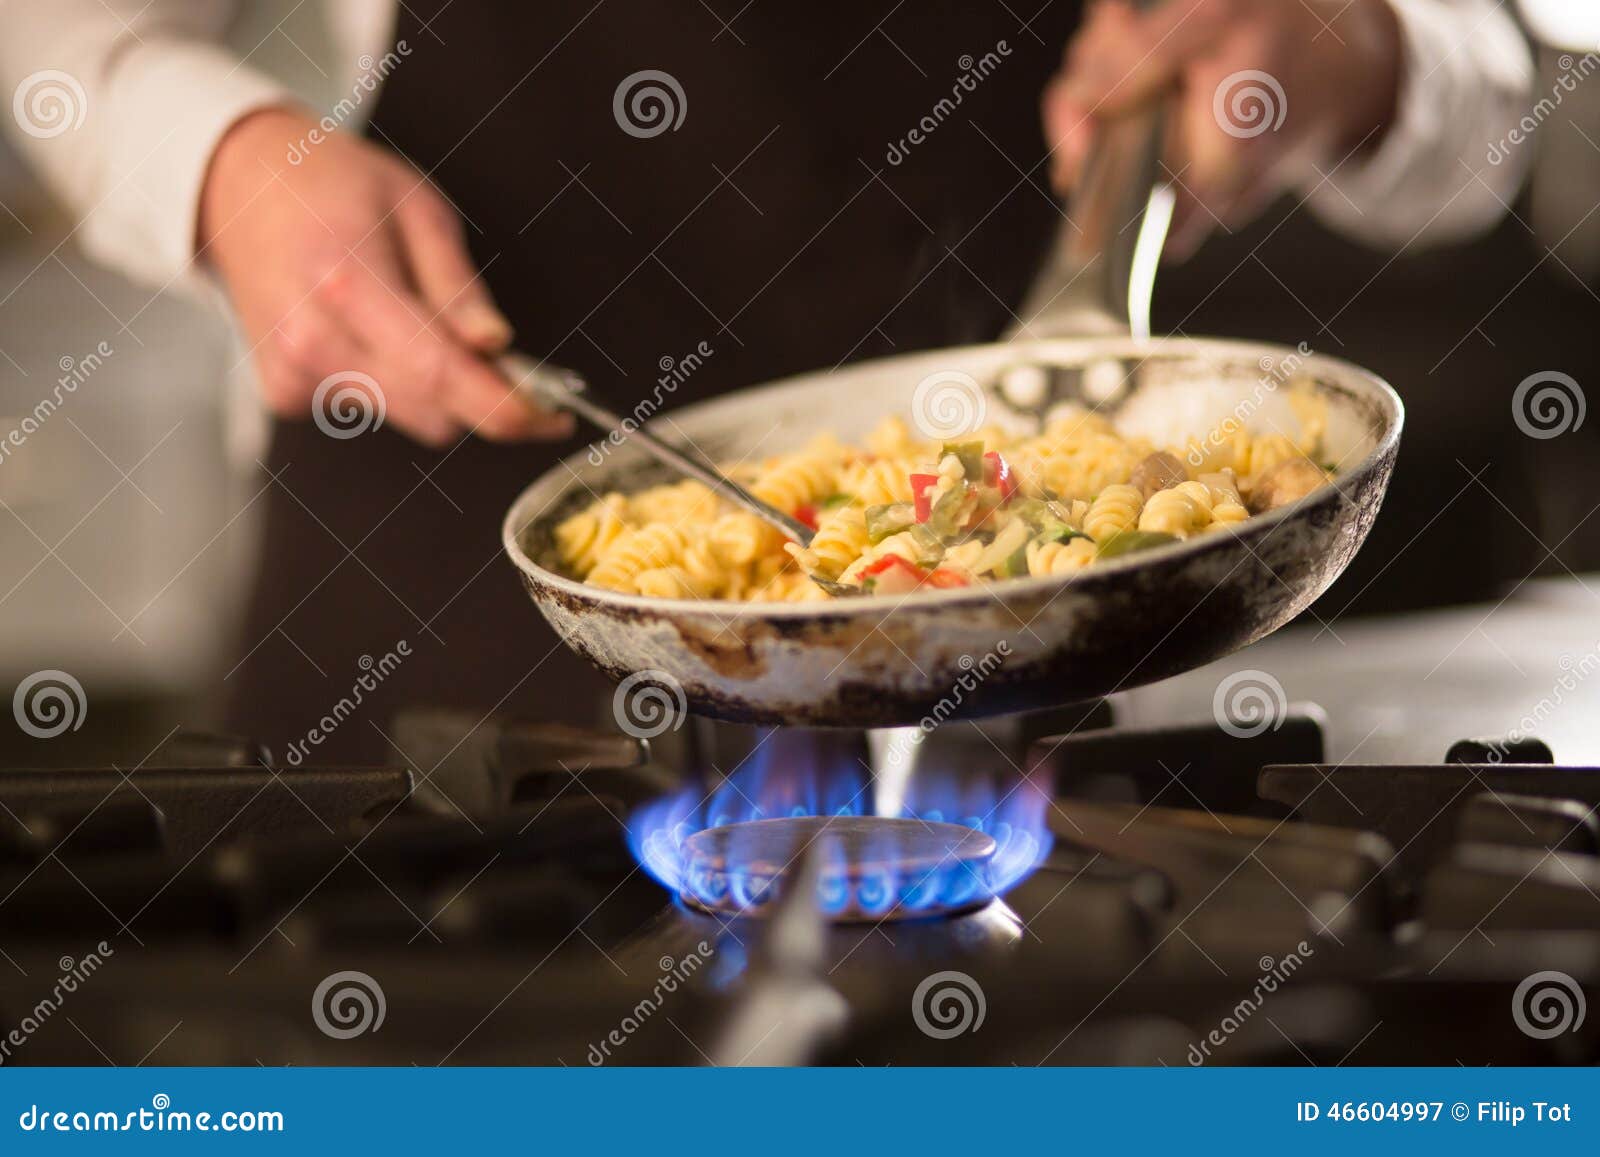 pasta dish with vegetables on stove